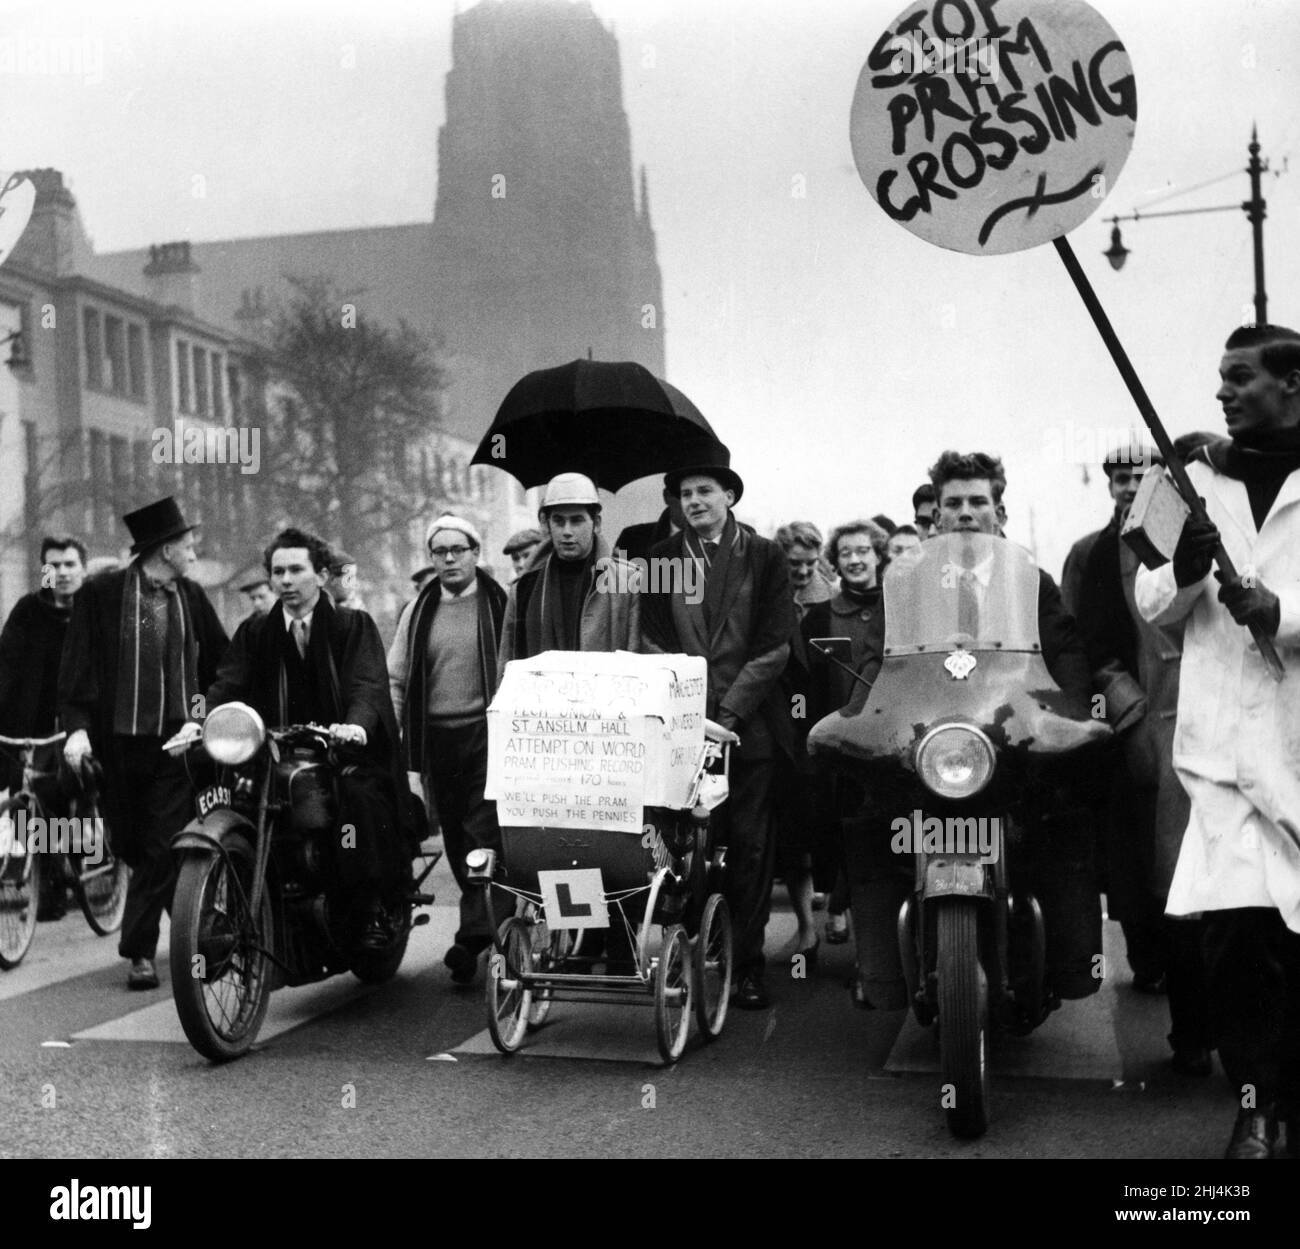 Manchester University and Faculty of Technology rag. Start of the attempt on the world pram pushing record. 2nd February 1959. Stock Photo